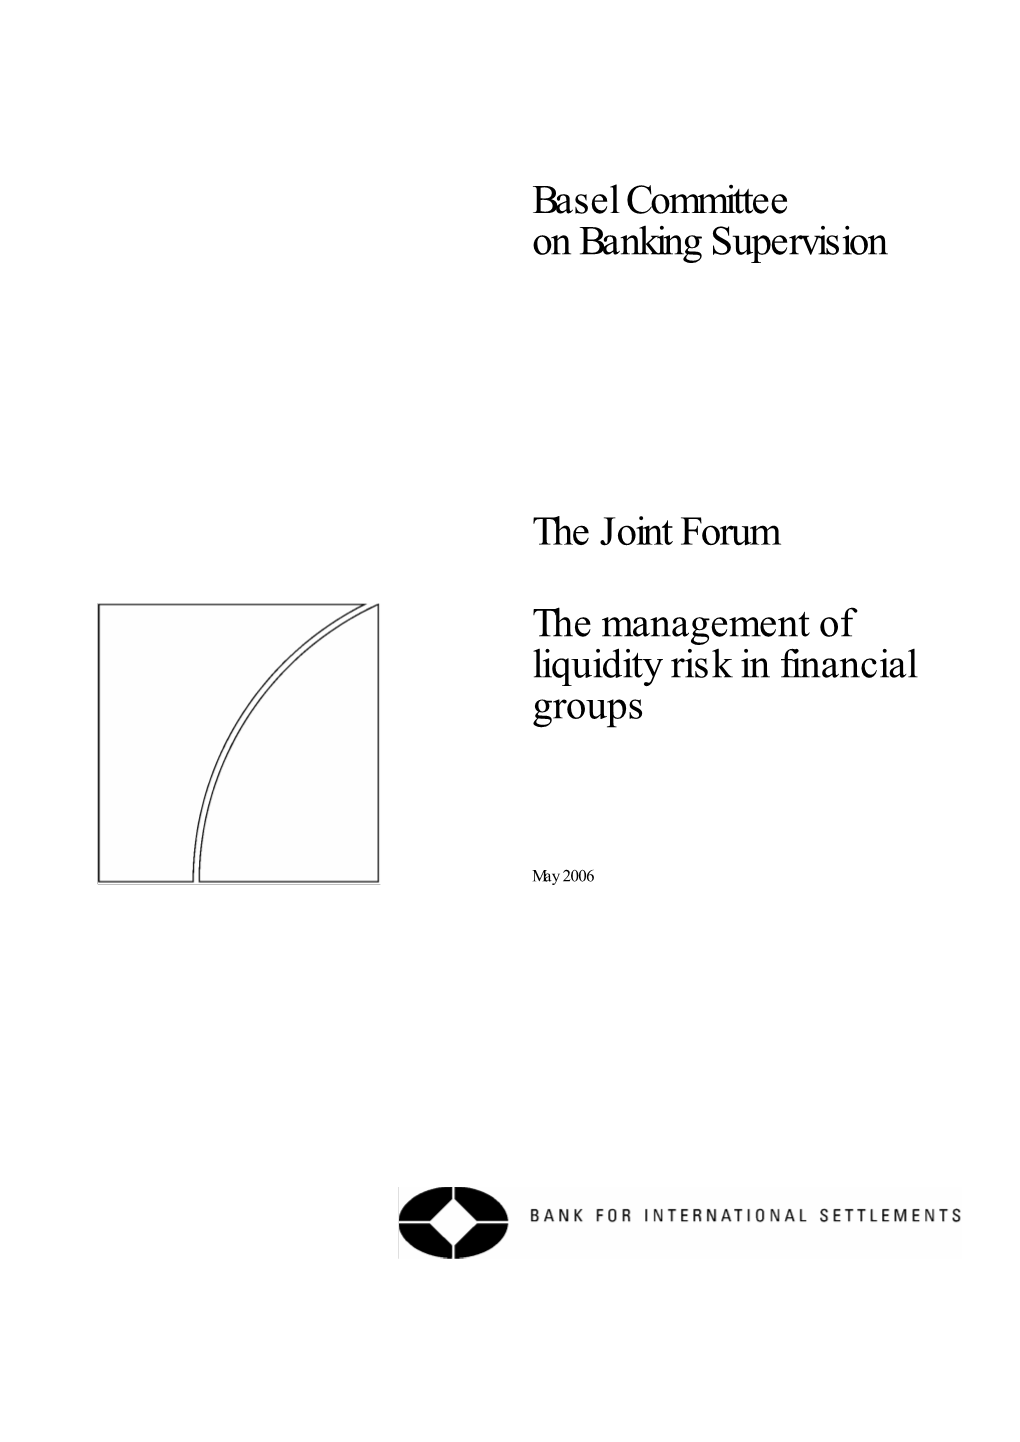 The Management of Liquidity Risk in Financial Groups